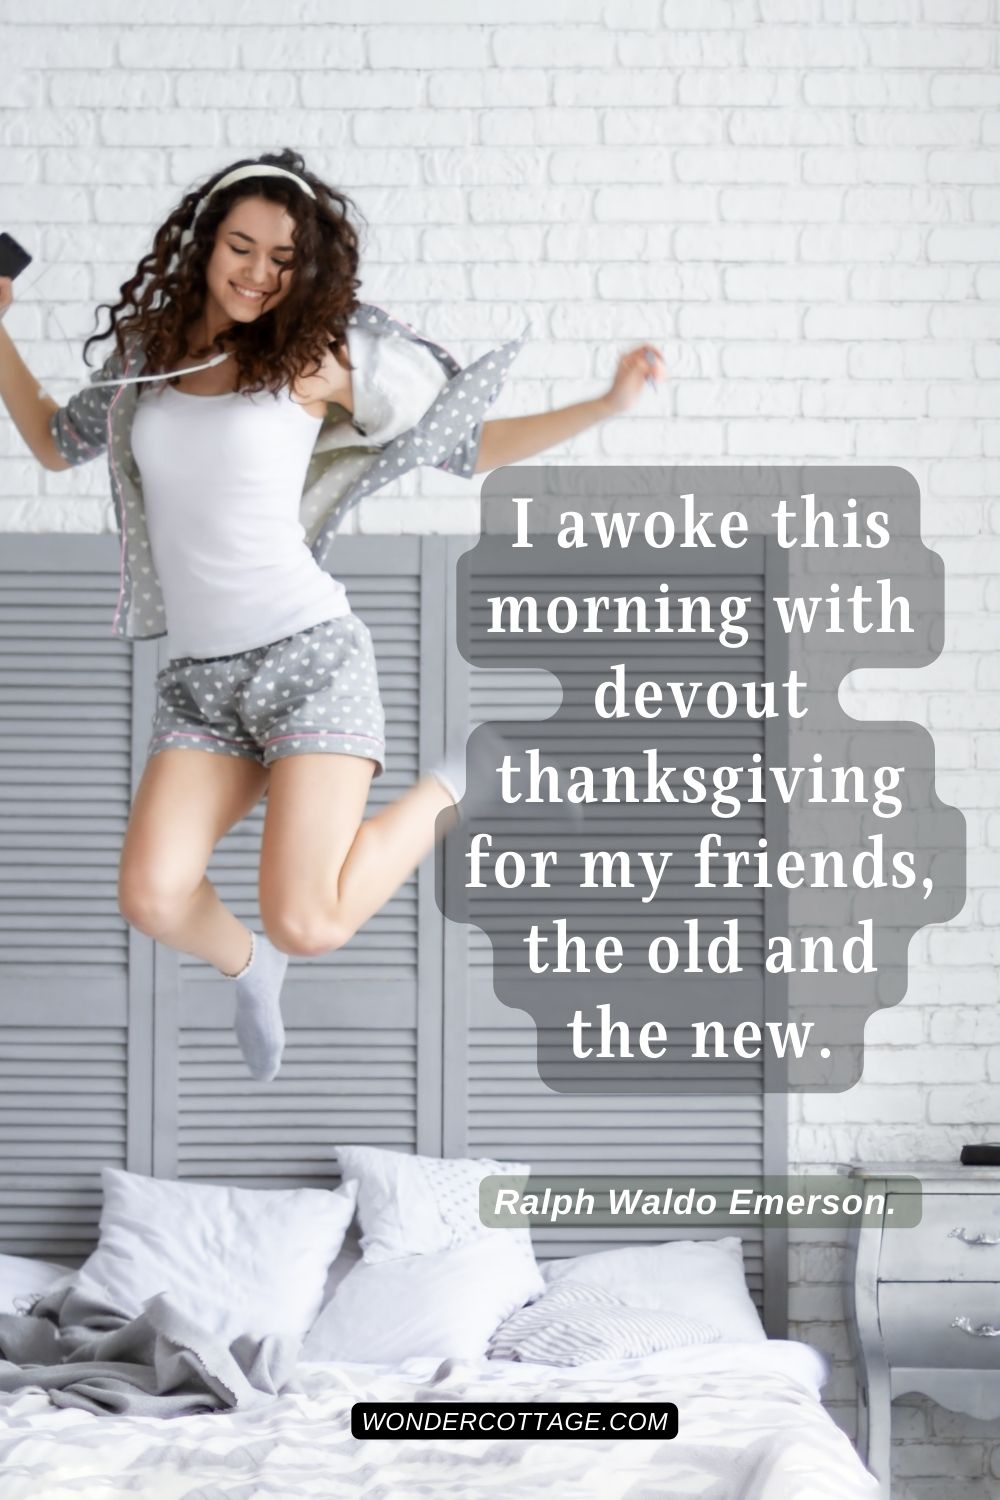 I awoke this morning with devout thanksgiving for my friends, the old and the new. Ralph Waldo Emerson.